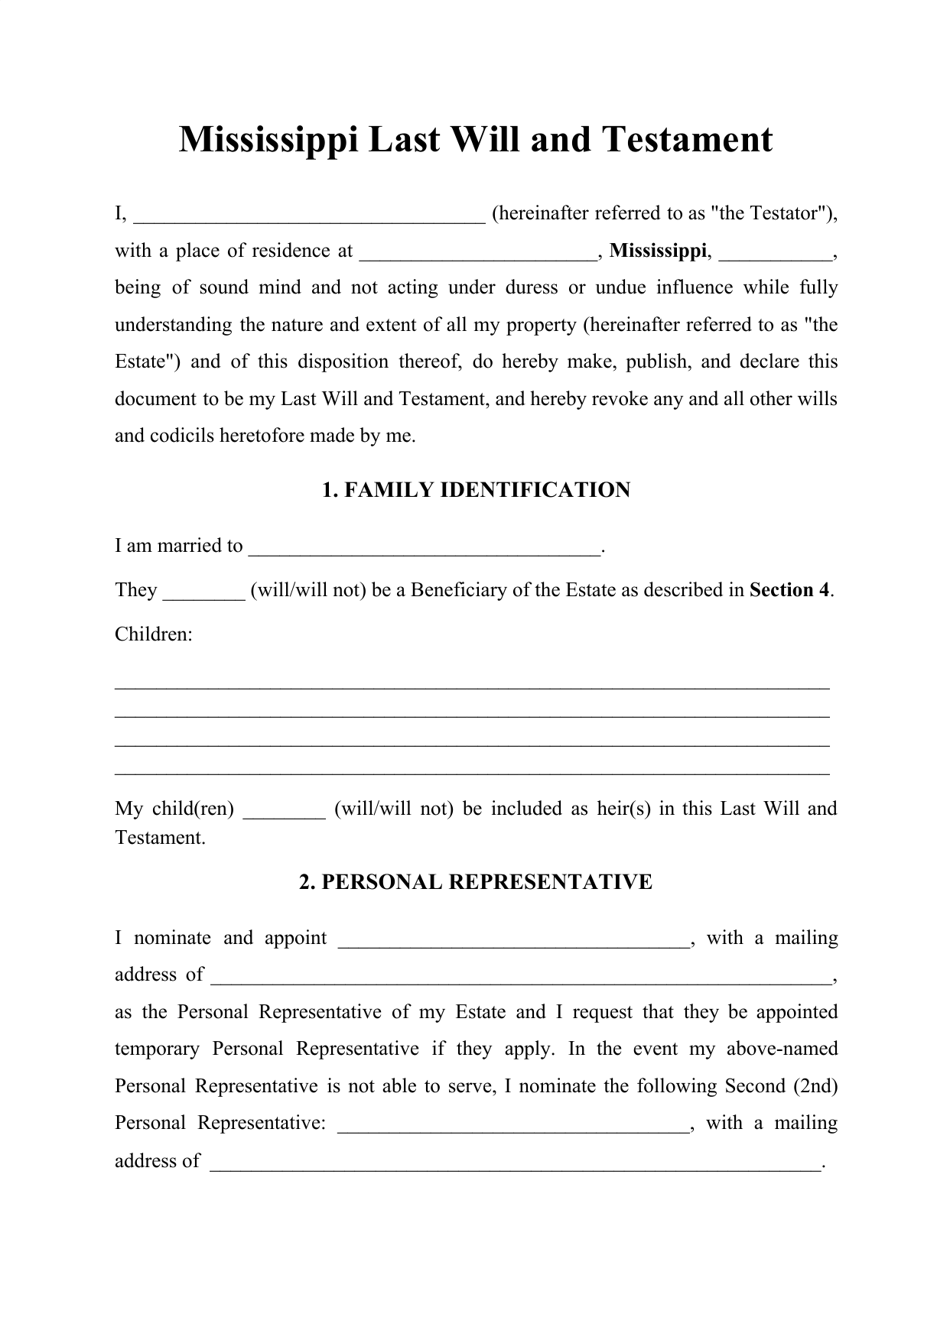 Last Will and Testament Template with Mississippi Theme